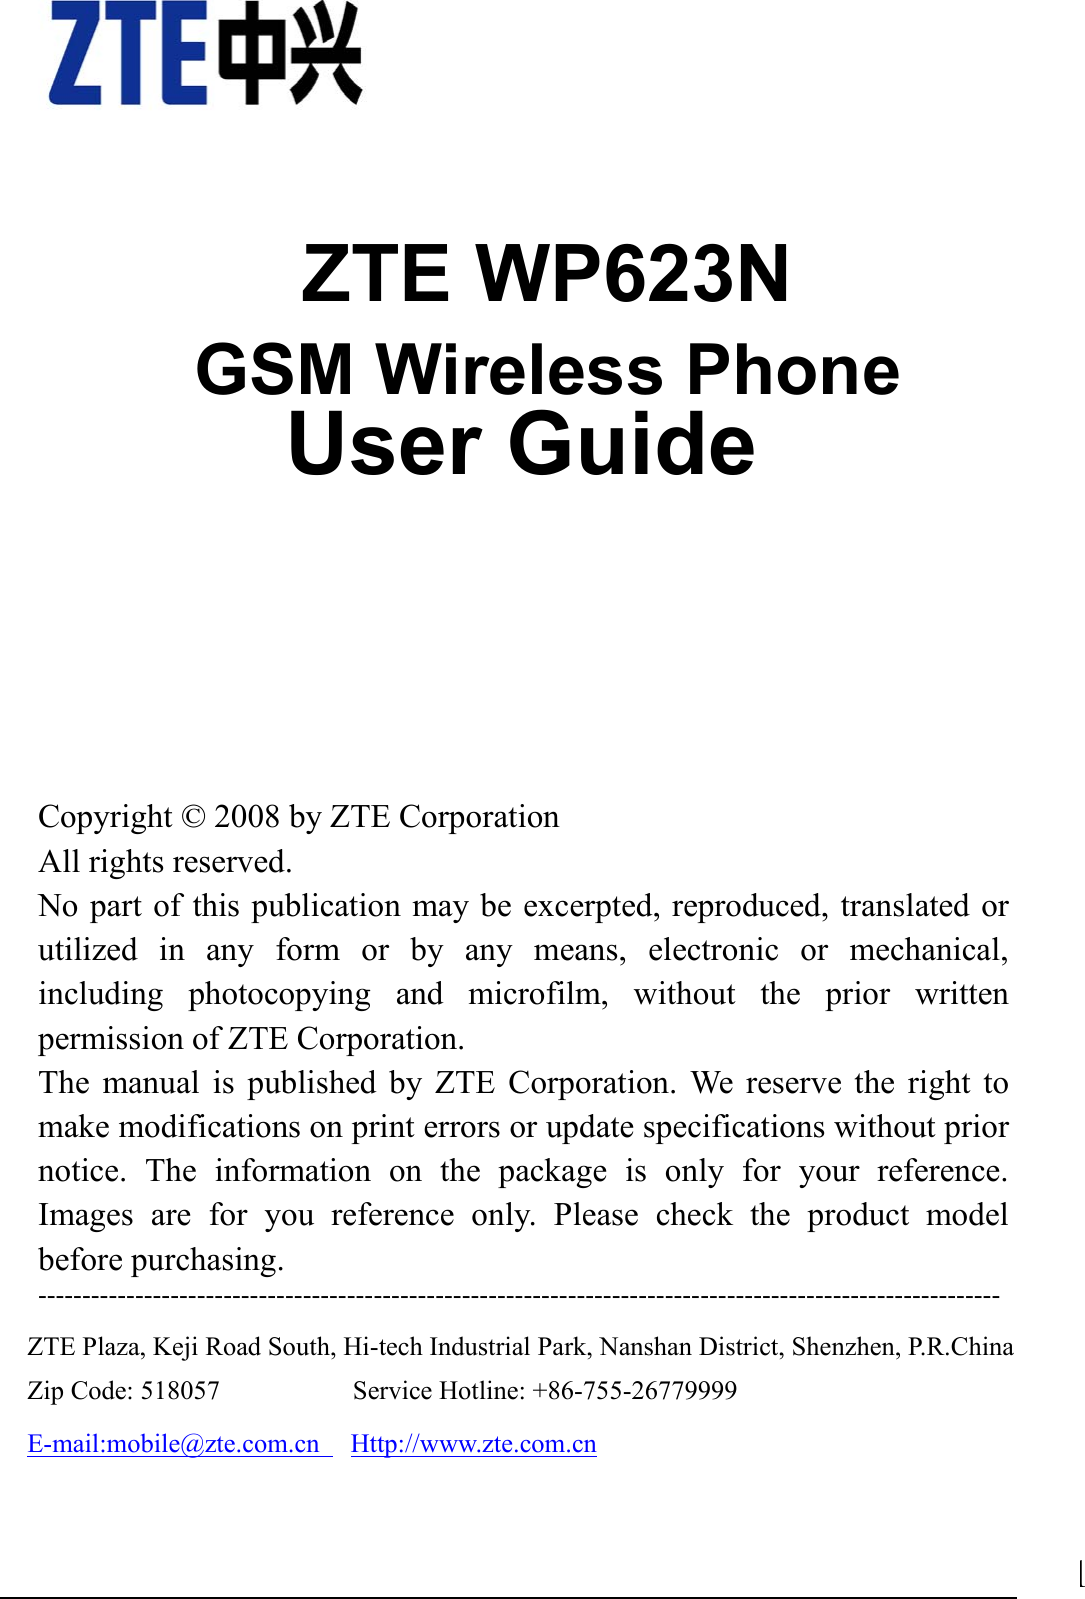                                1    ZTE WP623N GSM Wireless Phone               User Guide         Copyright © 2008 by ZTE Corporation All rights reserved. No part of this publication may be excerpted, reproduced, translated or utilized in any form or by any means, electronic or mechanical, including photocopying and microfilm, without the prior written permission of ZTE Corporation. The manual is published by ZTE Corporation. We reserve the right to make modifications on print errors or update specifications without prior notice. The information on the package is only for your reference. Images are for you reference only. Please check the product model before purchasing.   ---------------------------------------------------------------------------------------------------------------------------ZTE Plaza, Keji Road South, Hi-tech Industrial Park, Nanshan District, Shenzhen, P.R.China   Zip Code: 518057          Service Hotline: +86-755-26779999    E-mail:mobile@zte.com.cn   Http://www.zte.com.cn  